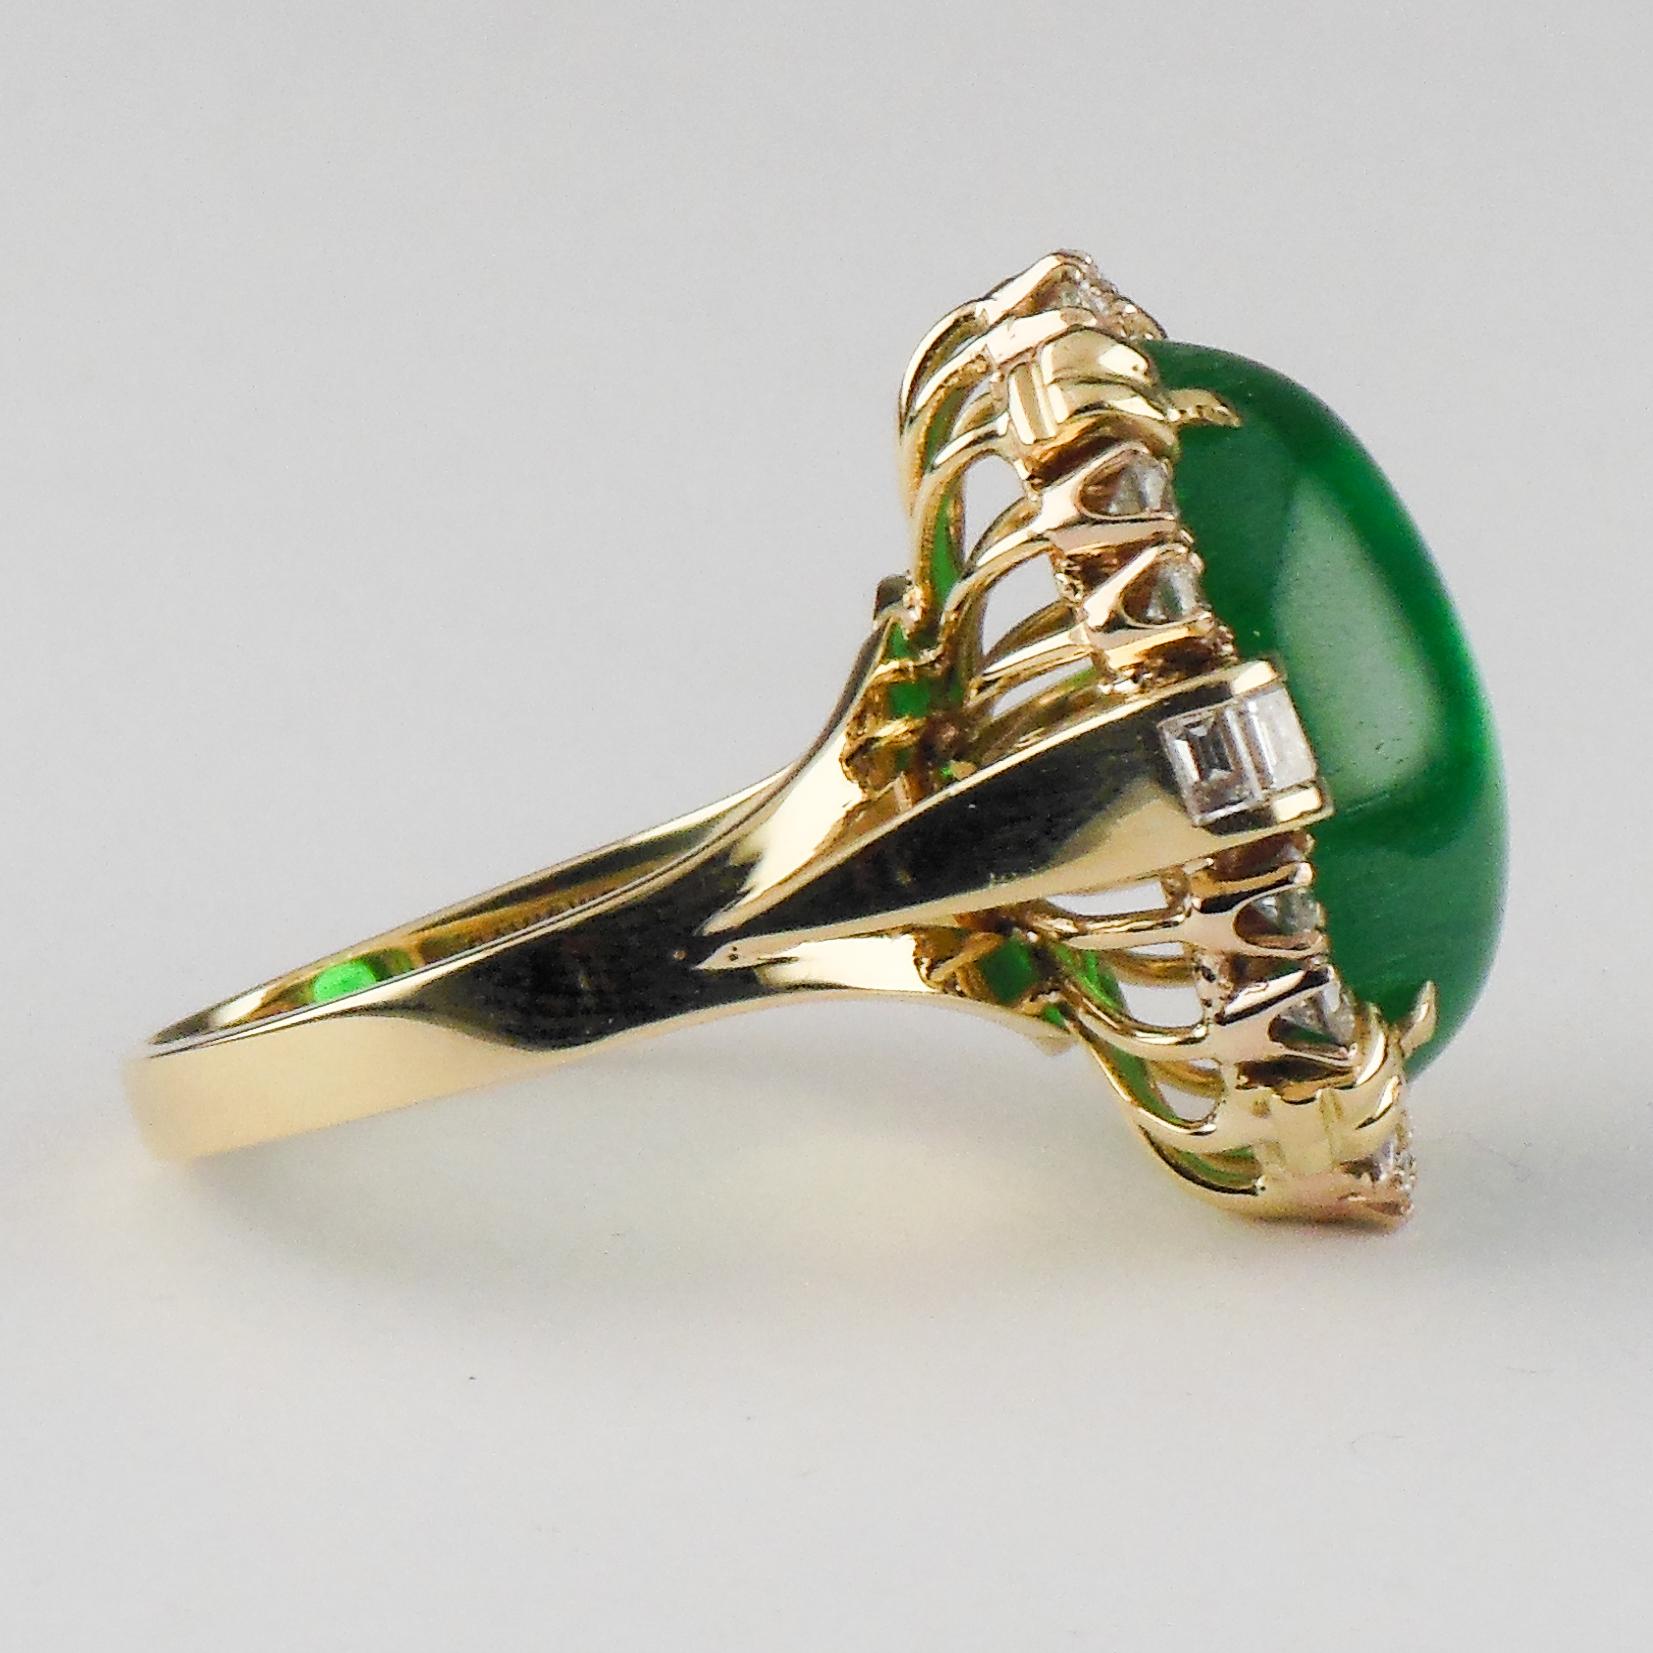 Oval Cut 25.82 Carat Colombian Emerald Cabochon Diamond Yellow Gold Cocktail Ring